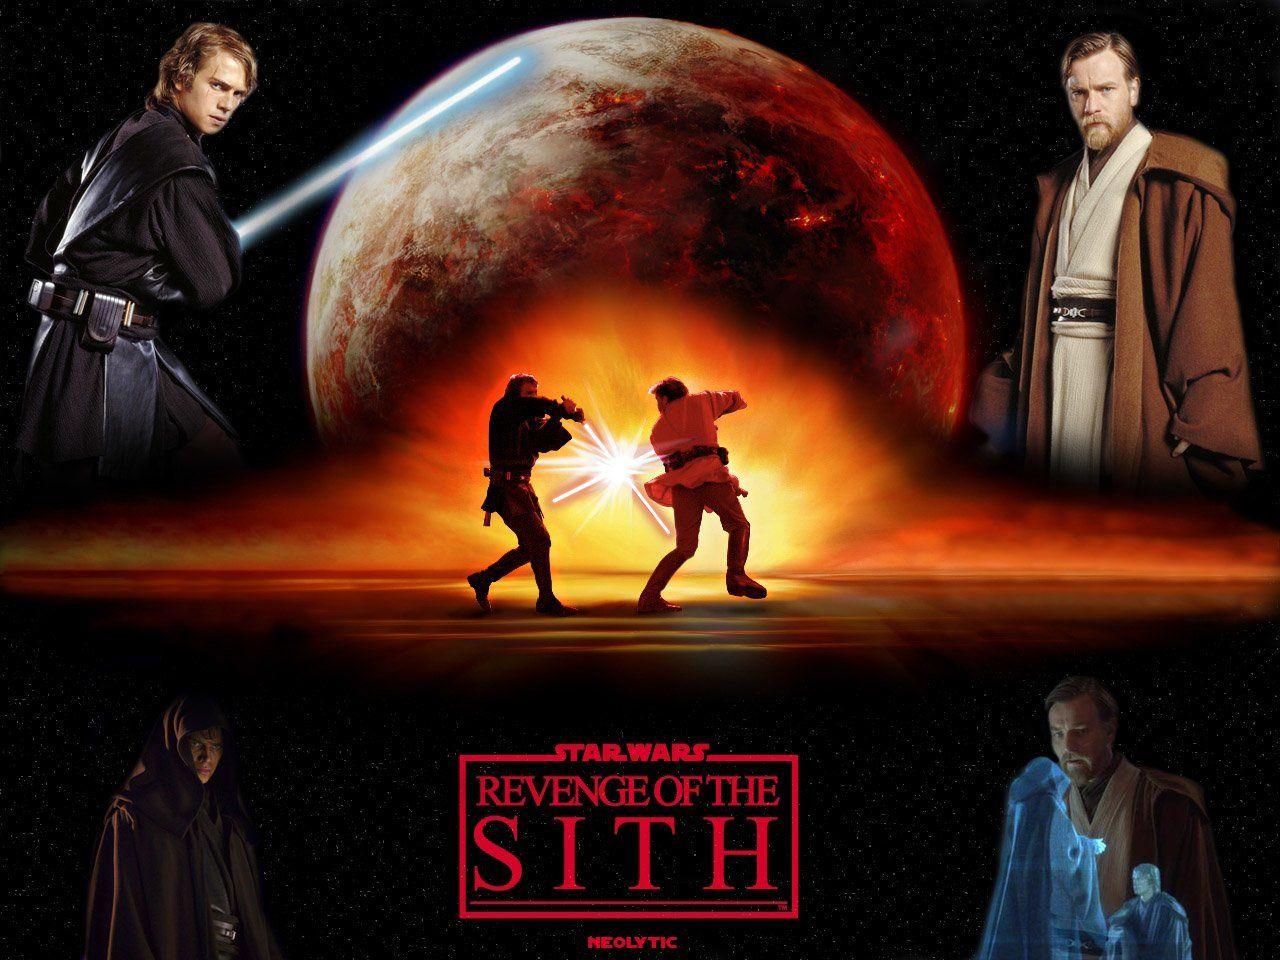 Star Wars Episode III: Revenge of the Sith Wallpaper and Background